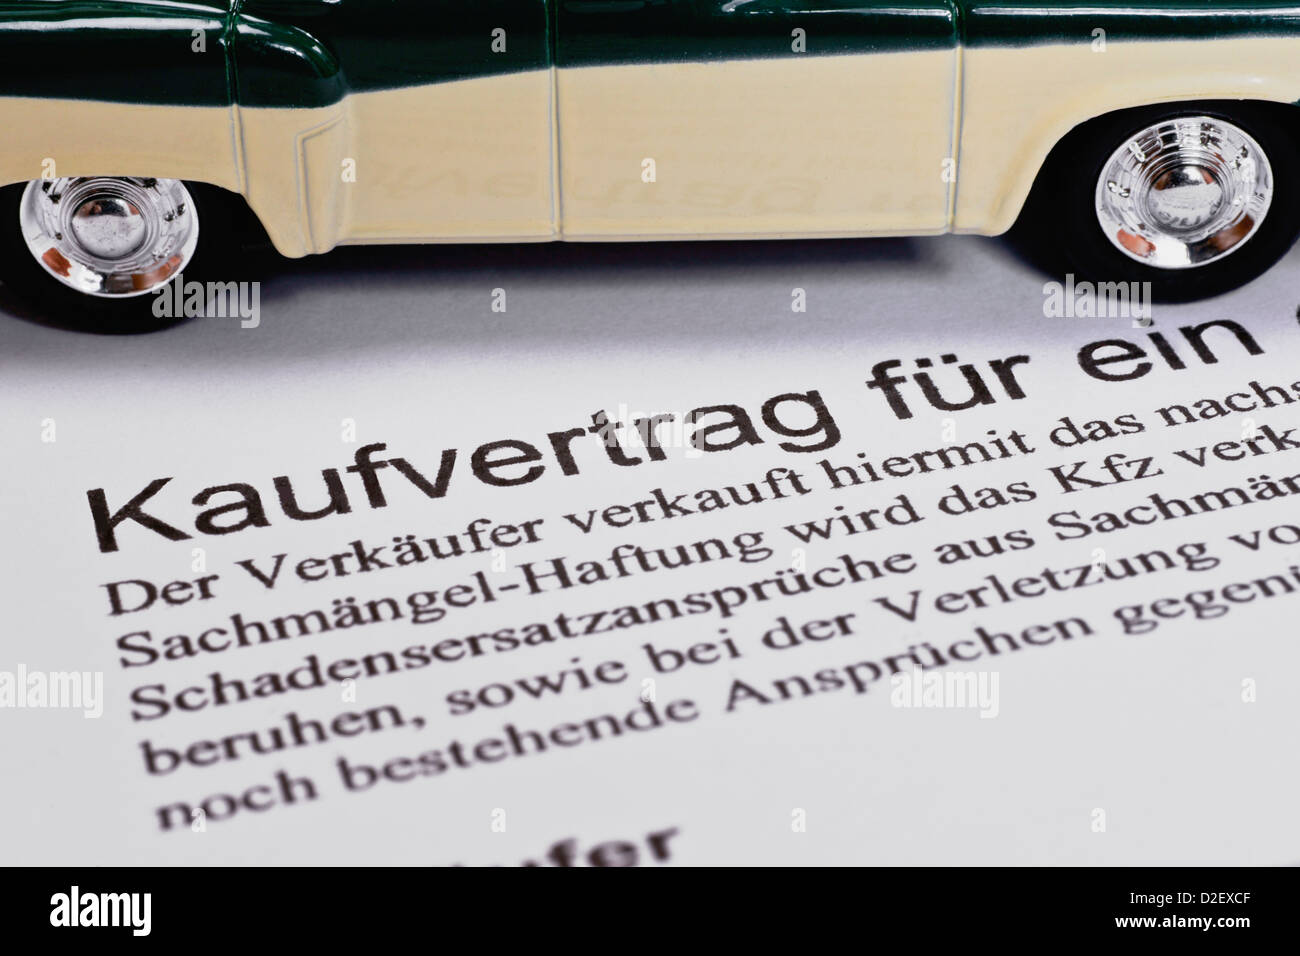 Detail photo of a Car sales agreement in German, alongside is a model car Stock Photo